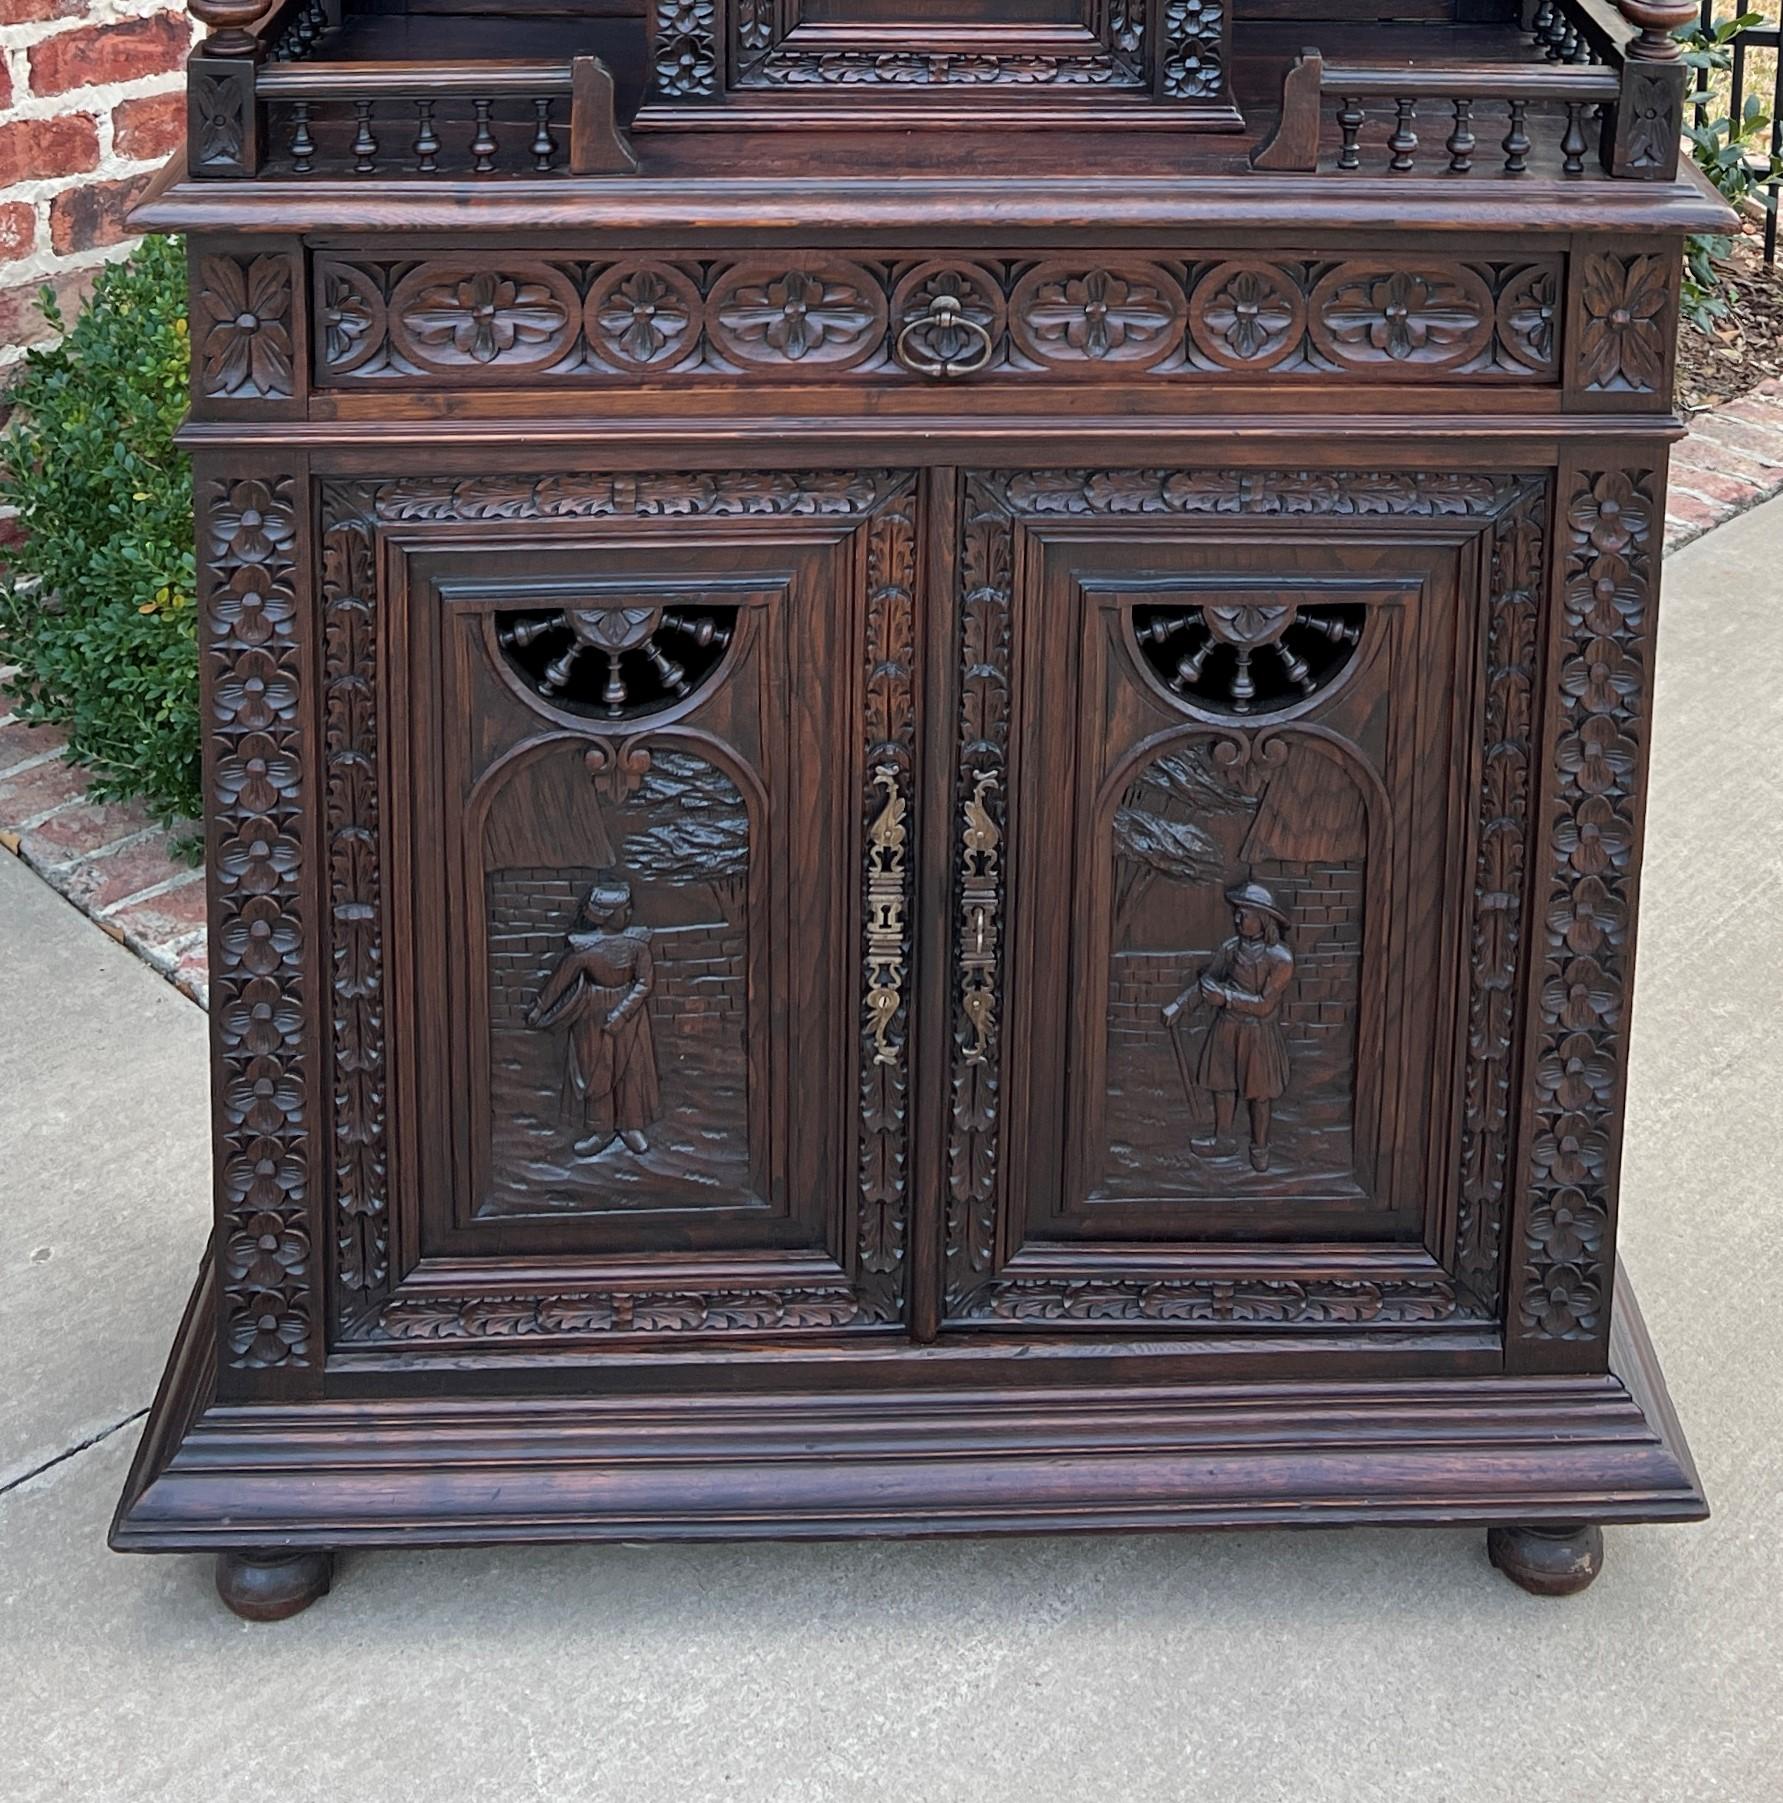 Late 19th Century Antique French Plate Dresser Breton Brittany Buffet Sideboard Server Hutch 19c